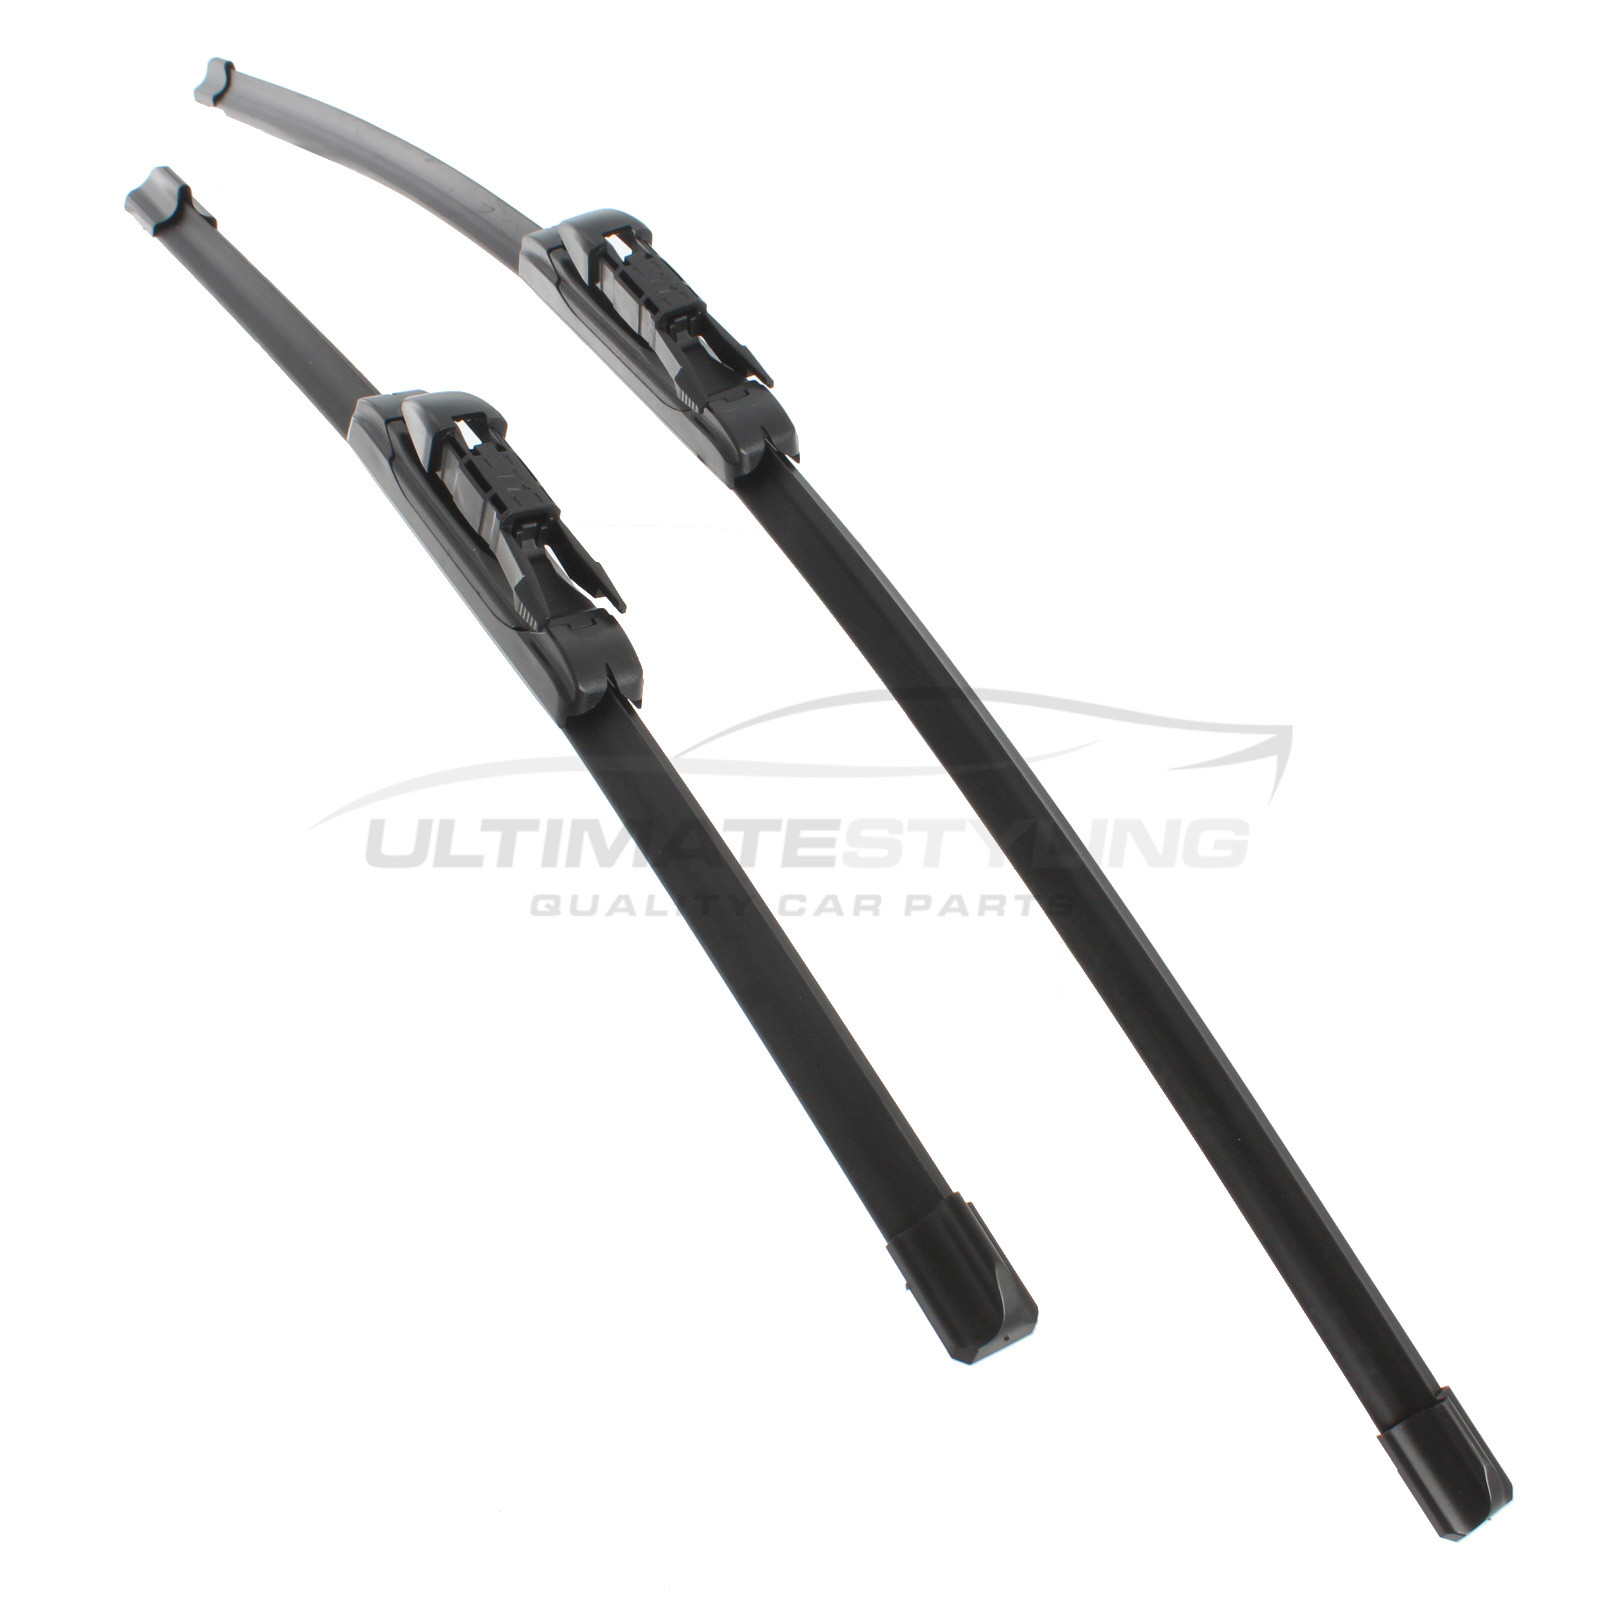 Drivers Side & Passenger Side (Front) Wiper Blades for Vauxhall Corsa